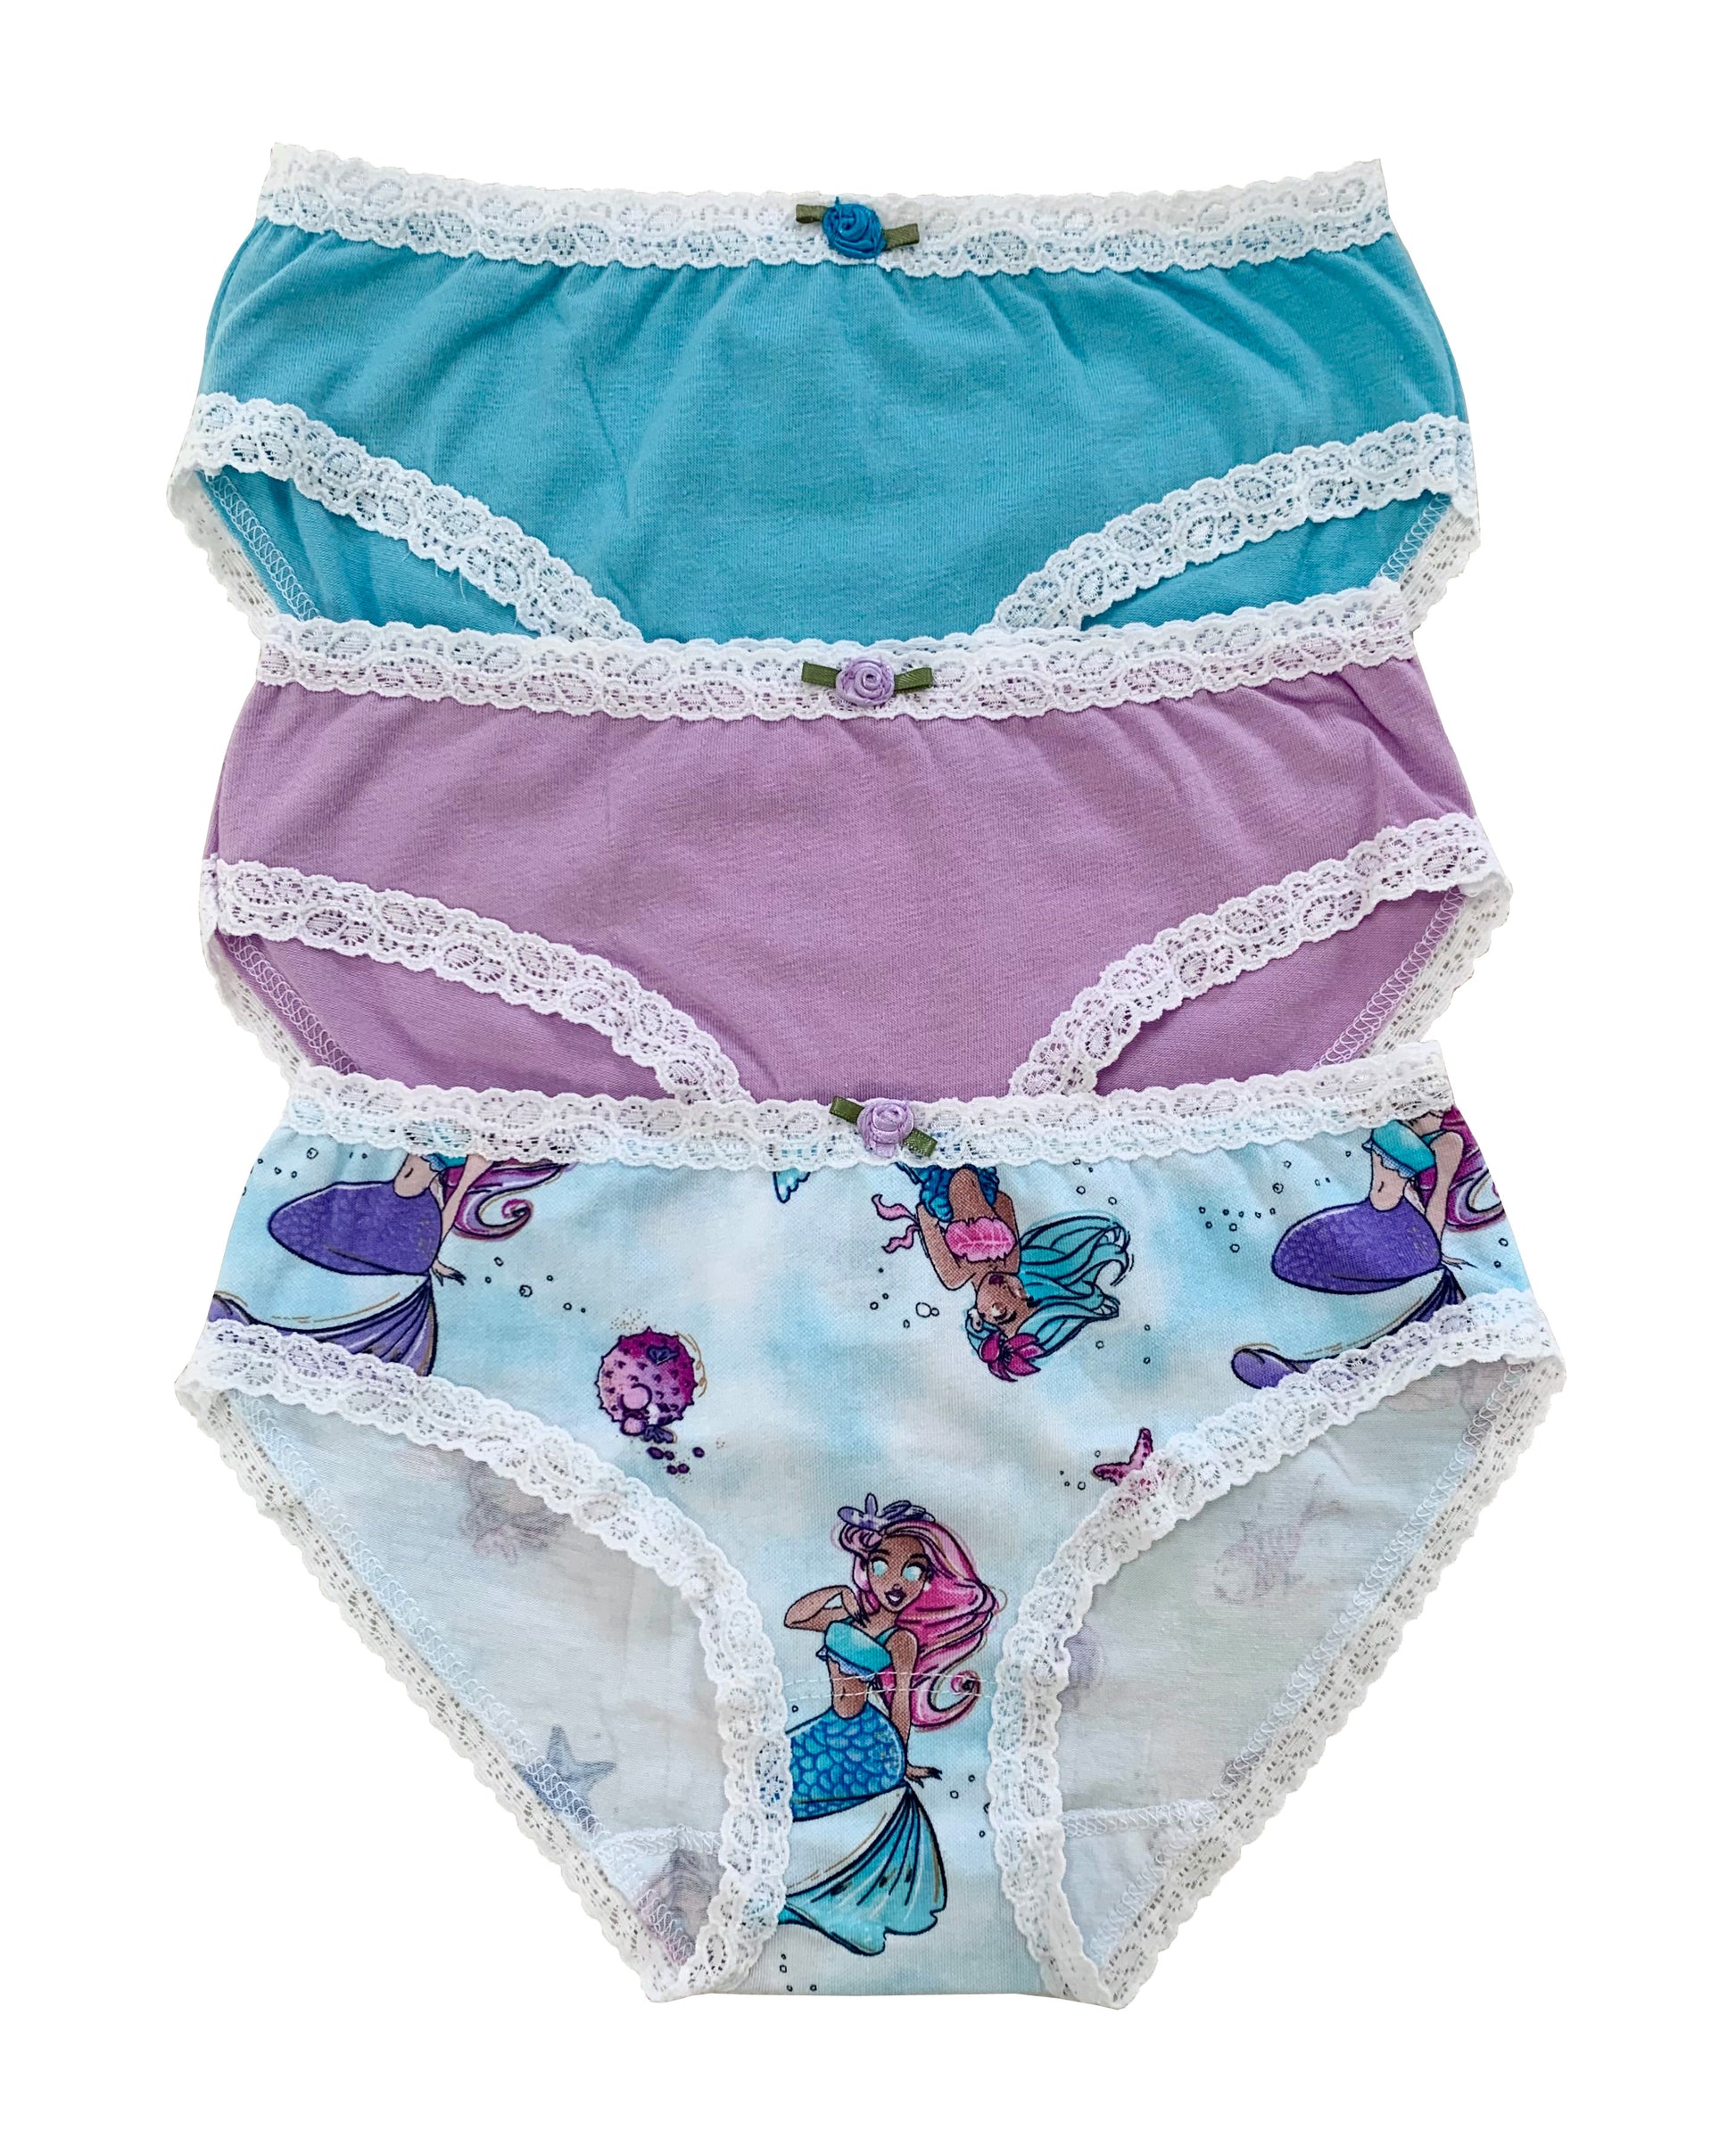 Buy DIM kids girl 3 pcs slip on brief panty navy and white and blue Online